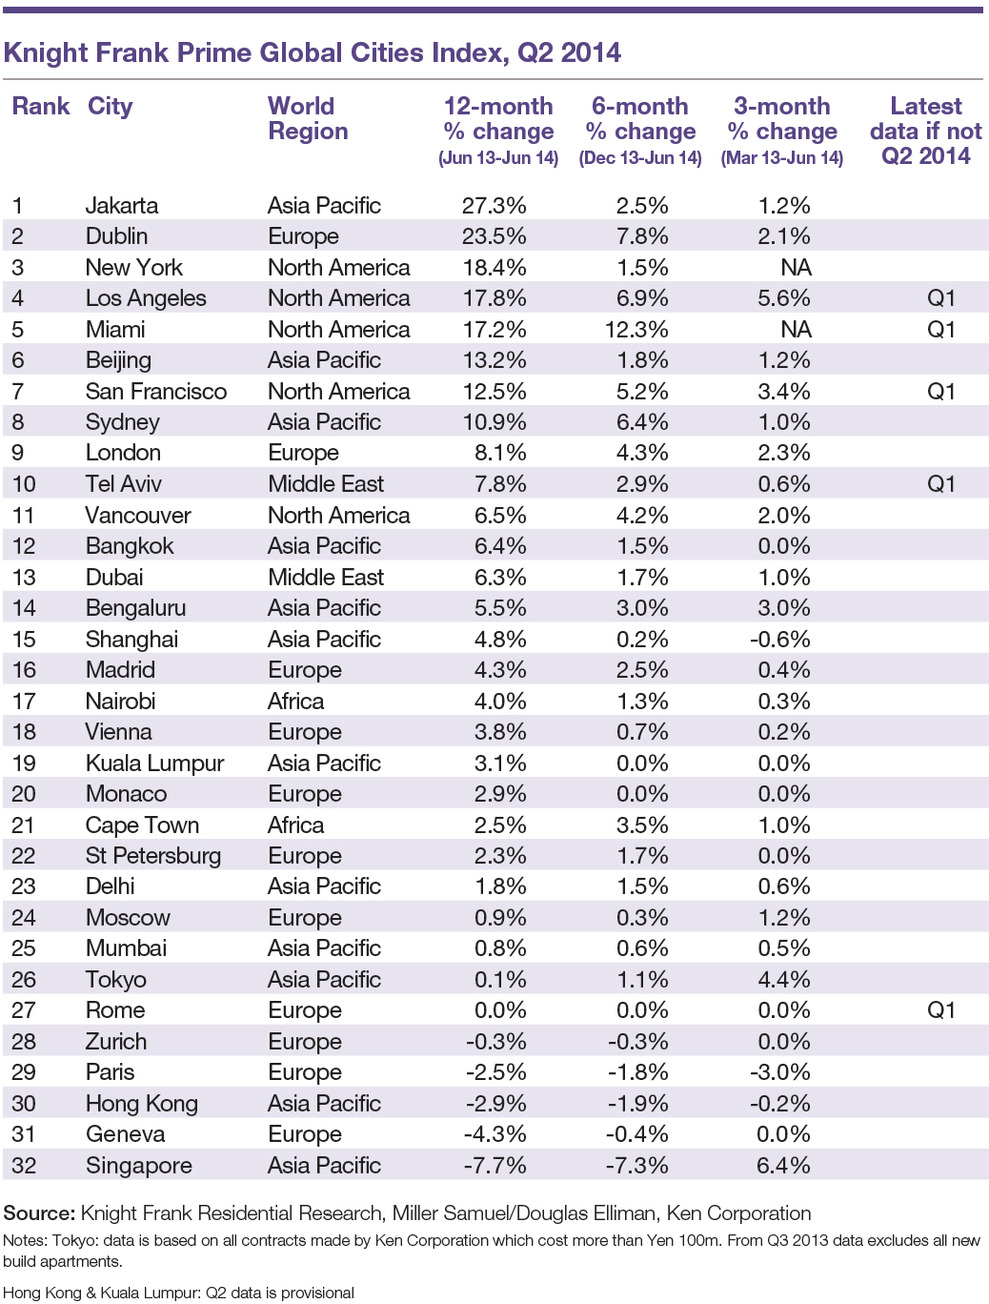 WPC News | Knight Frank Prime Global Cities Index Q2 2014